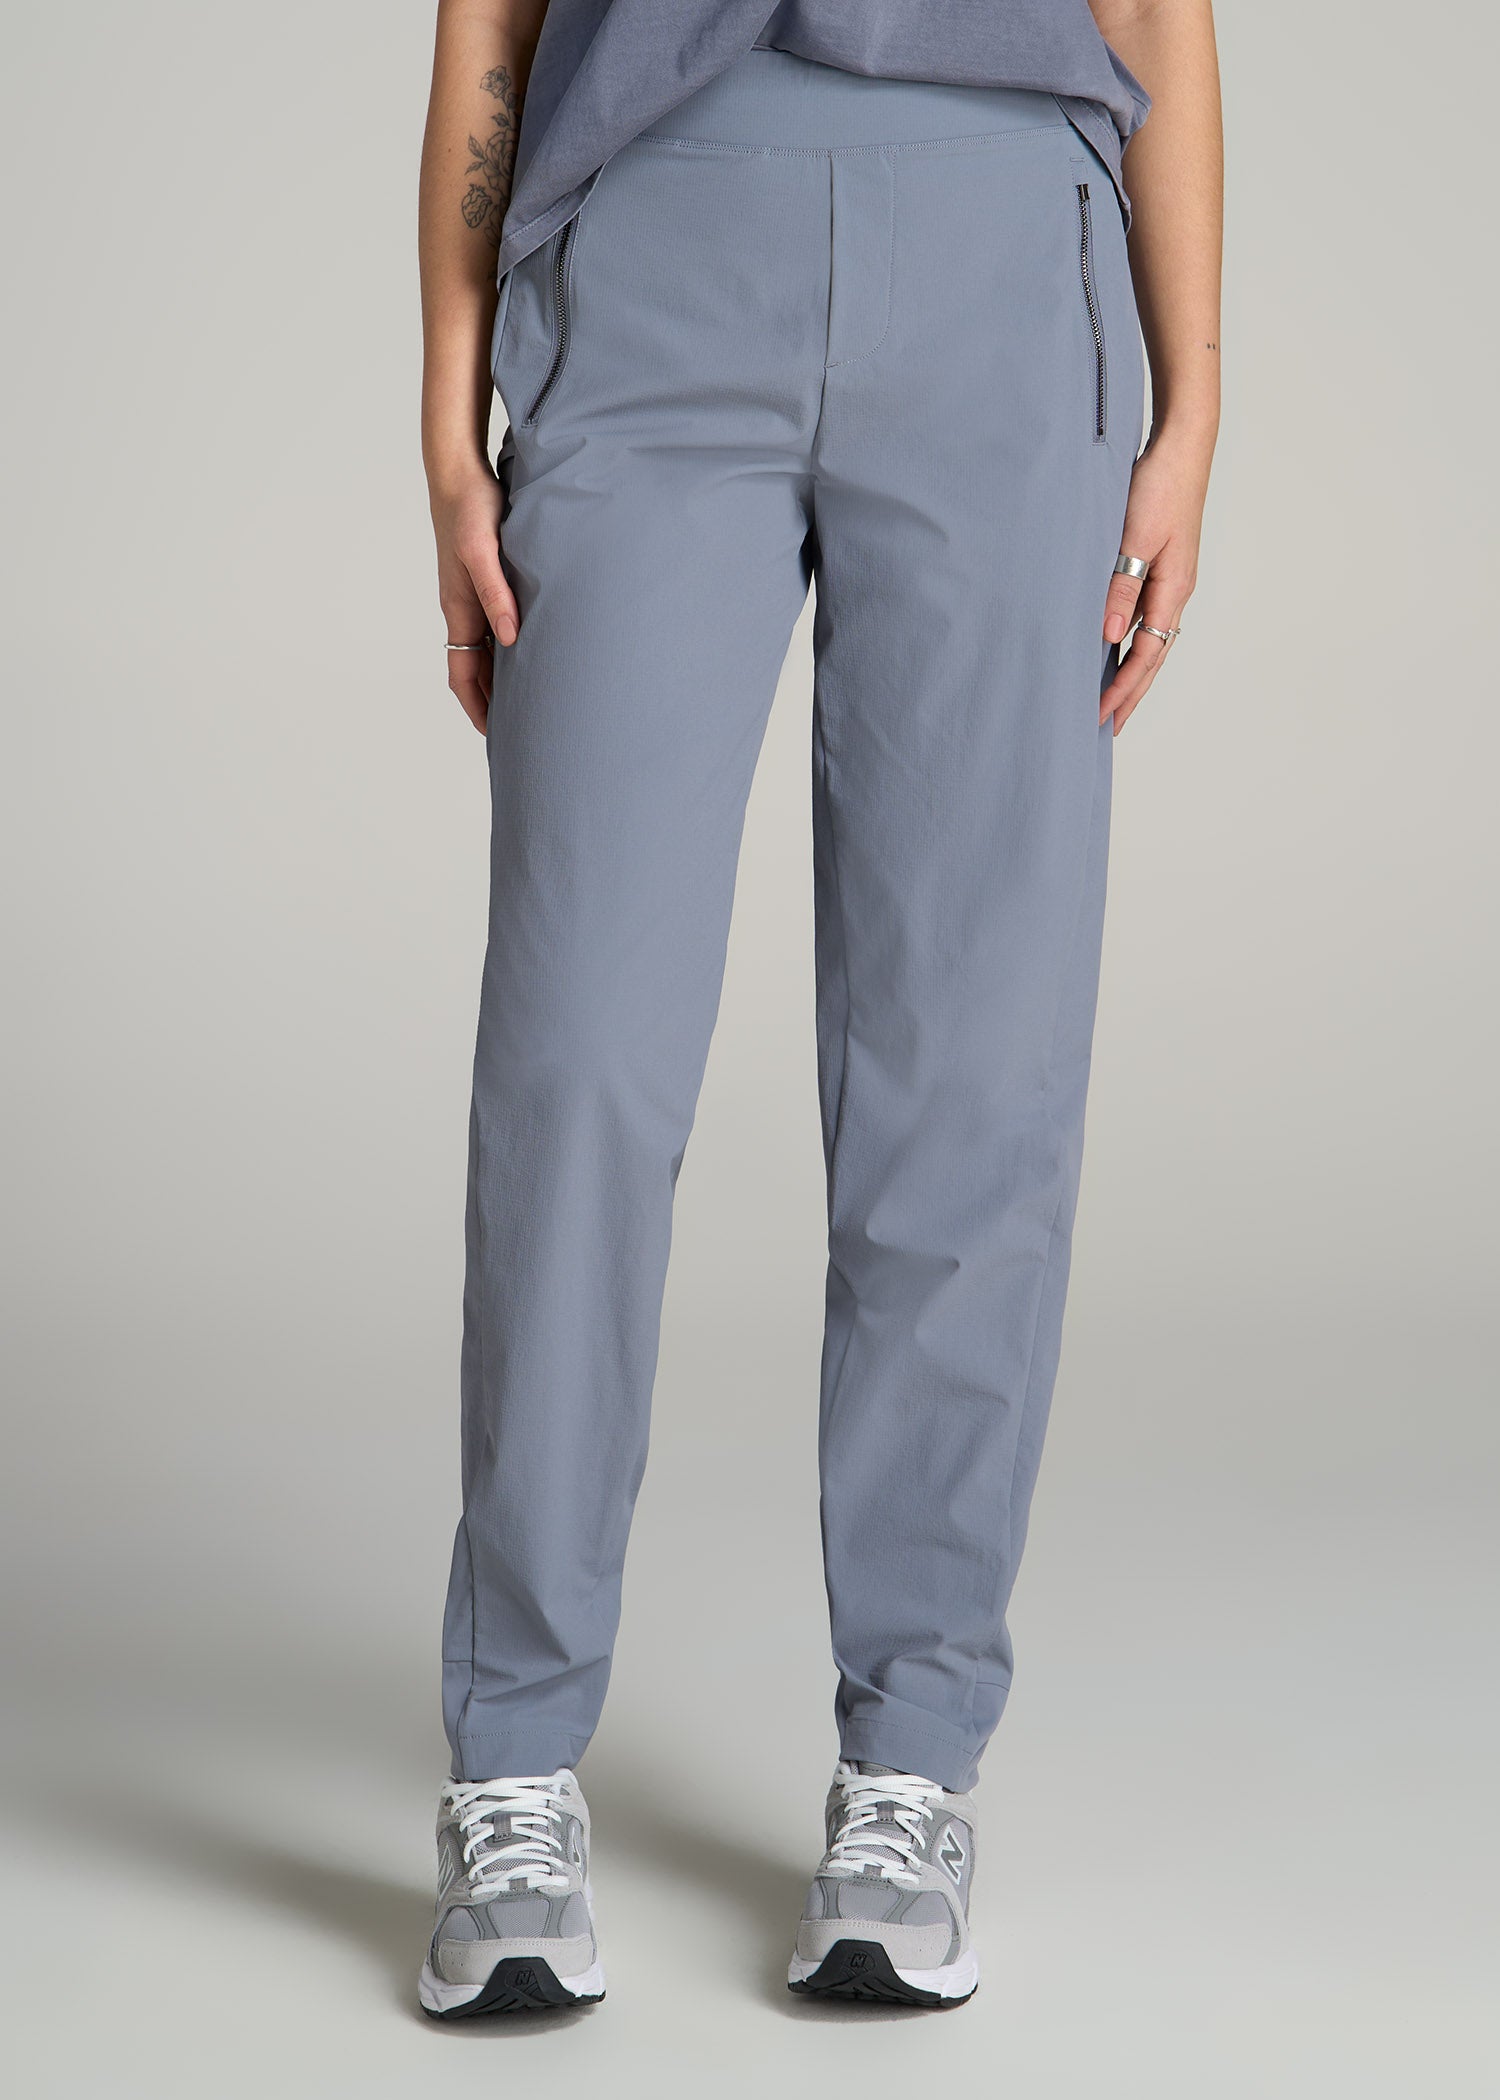 Pull-on Mini Ripstop Pants for Tall Women